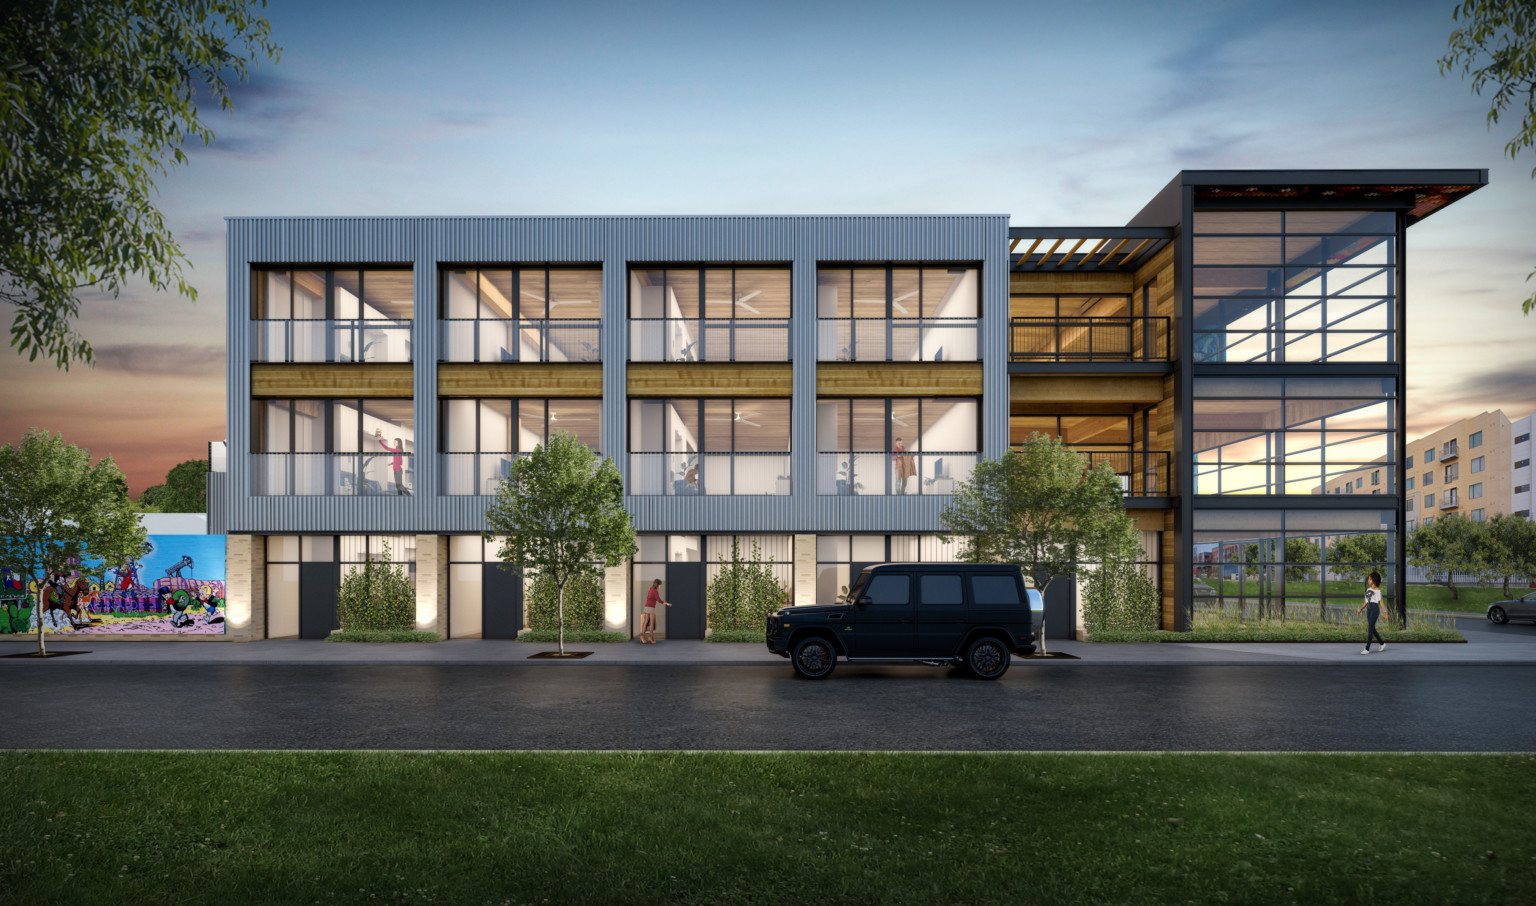 3 story mass timber building with exposed steel, right, and textured white wrap facade on left around large windows